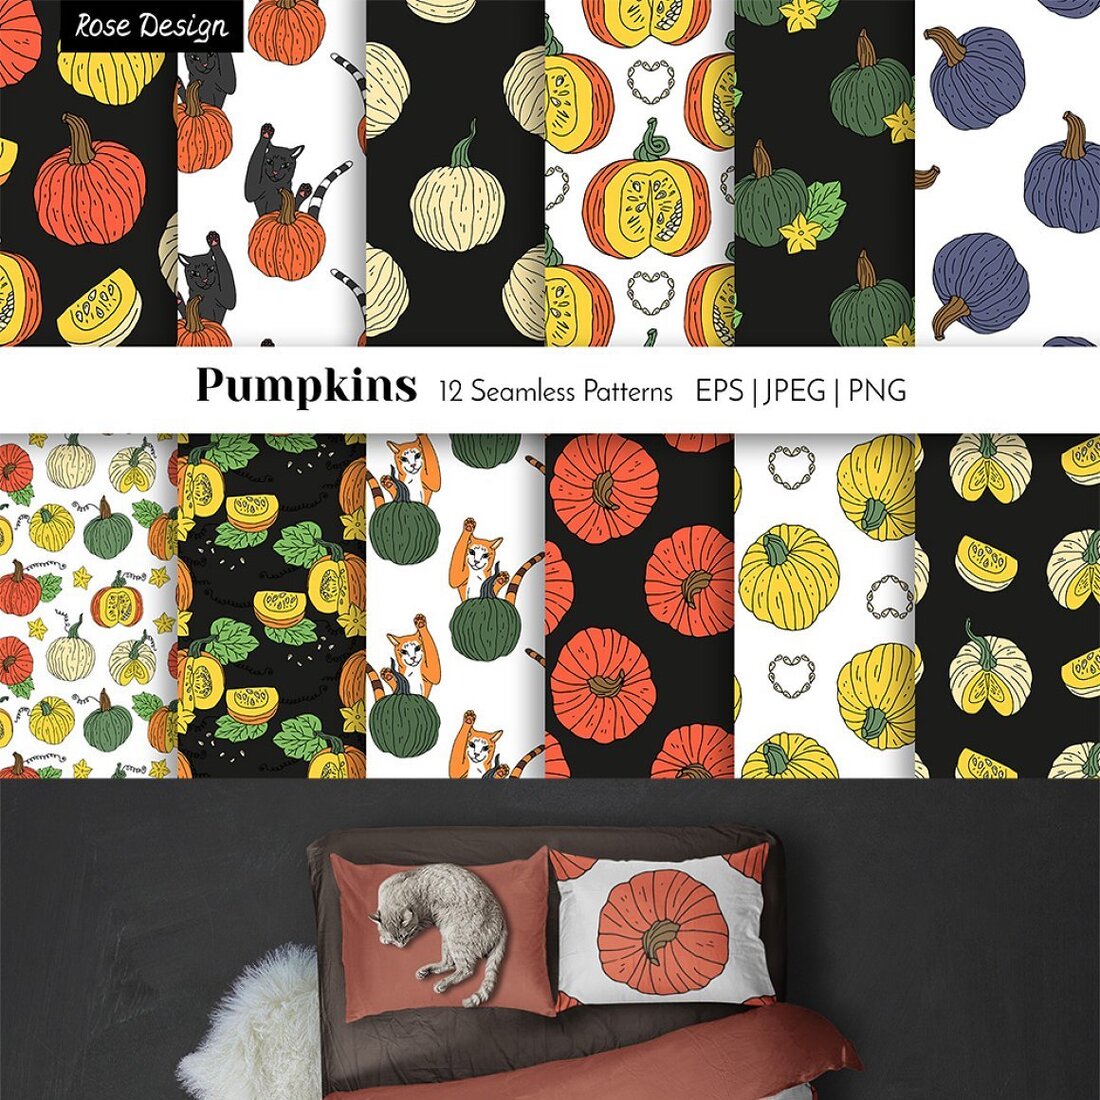 fall pumpkins patterns and elements main cover.